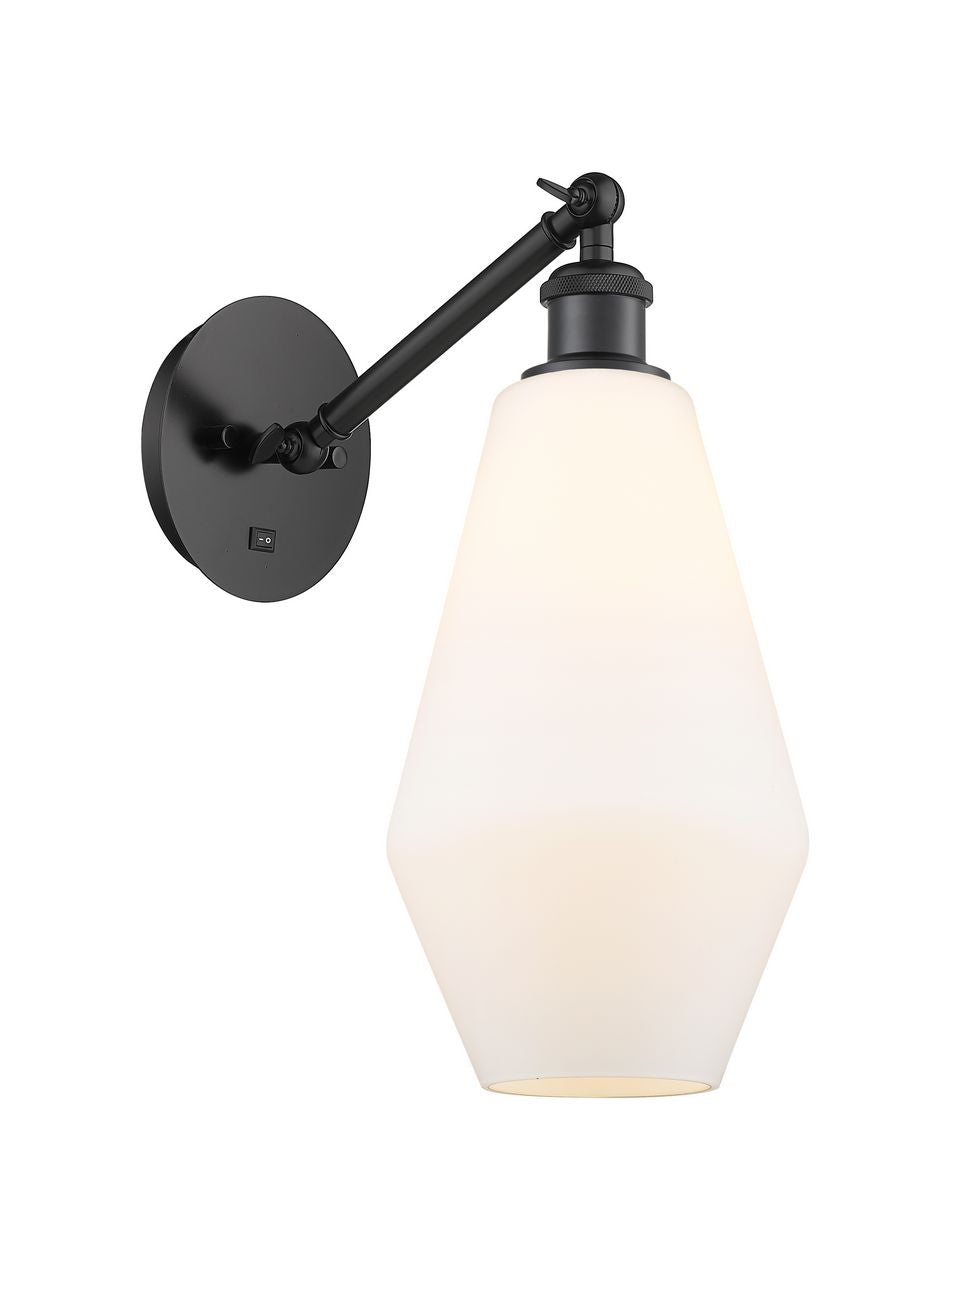 317-1W-BK-G651-7 1-Light 7" Matte Black Sconce - Cased Matte White Cindyrella 7" Glass - LED Bulb - Dimmensions: 7 x 13.25 x 16 - Glass Up or Down: Yes